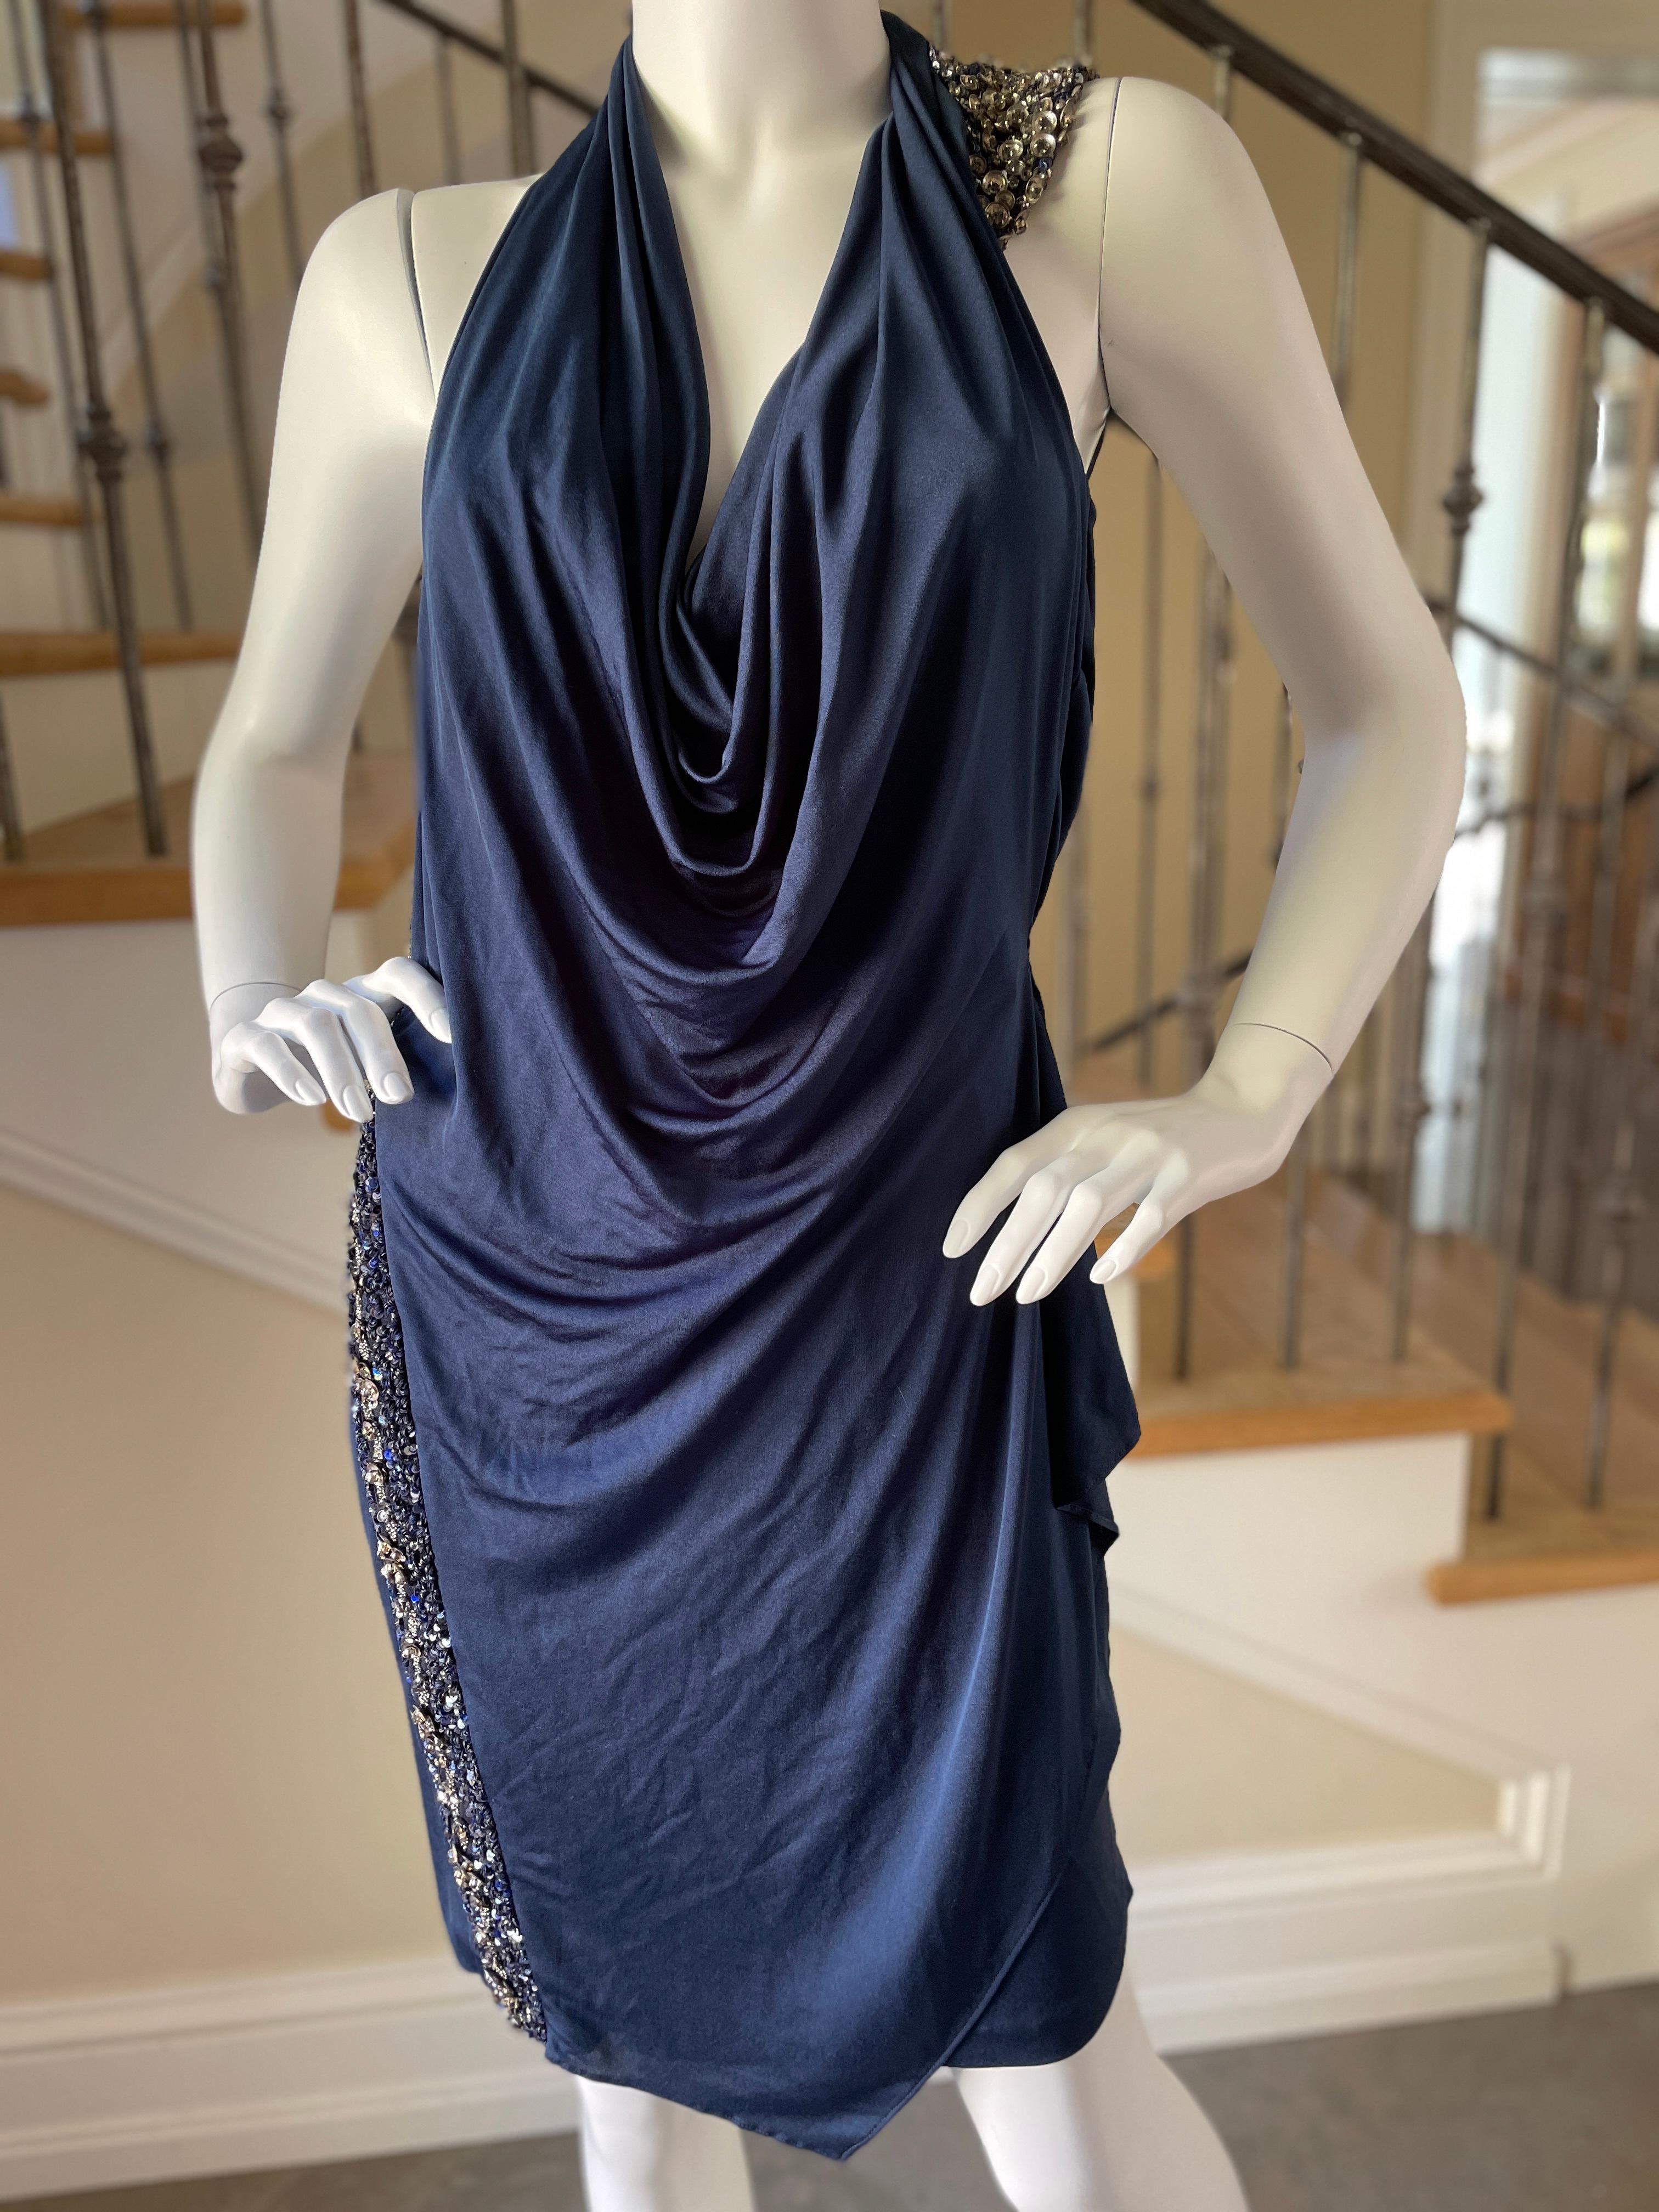 Roberto Cavalli Navy Blue Embellished Backless Mini Dress
This is so pretty
Size 44
 Bust 36